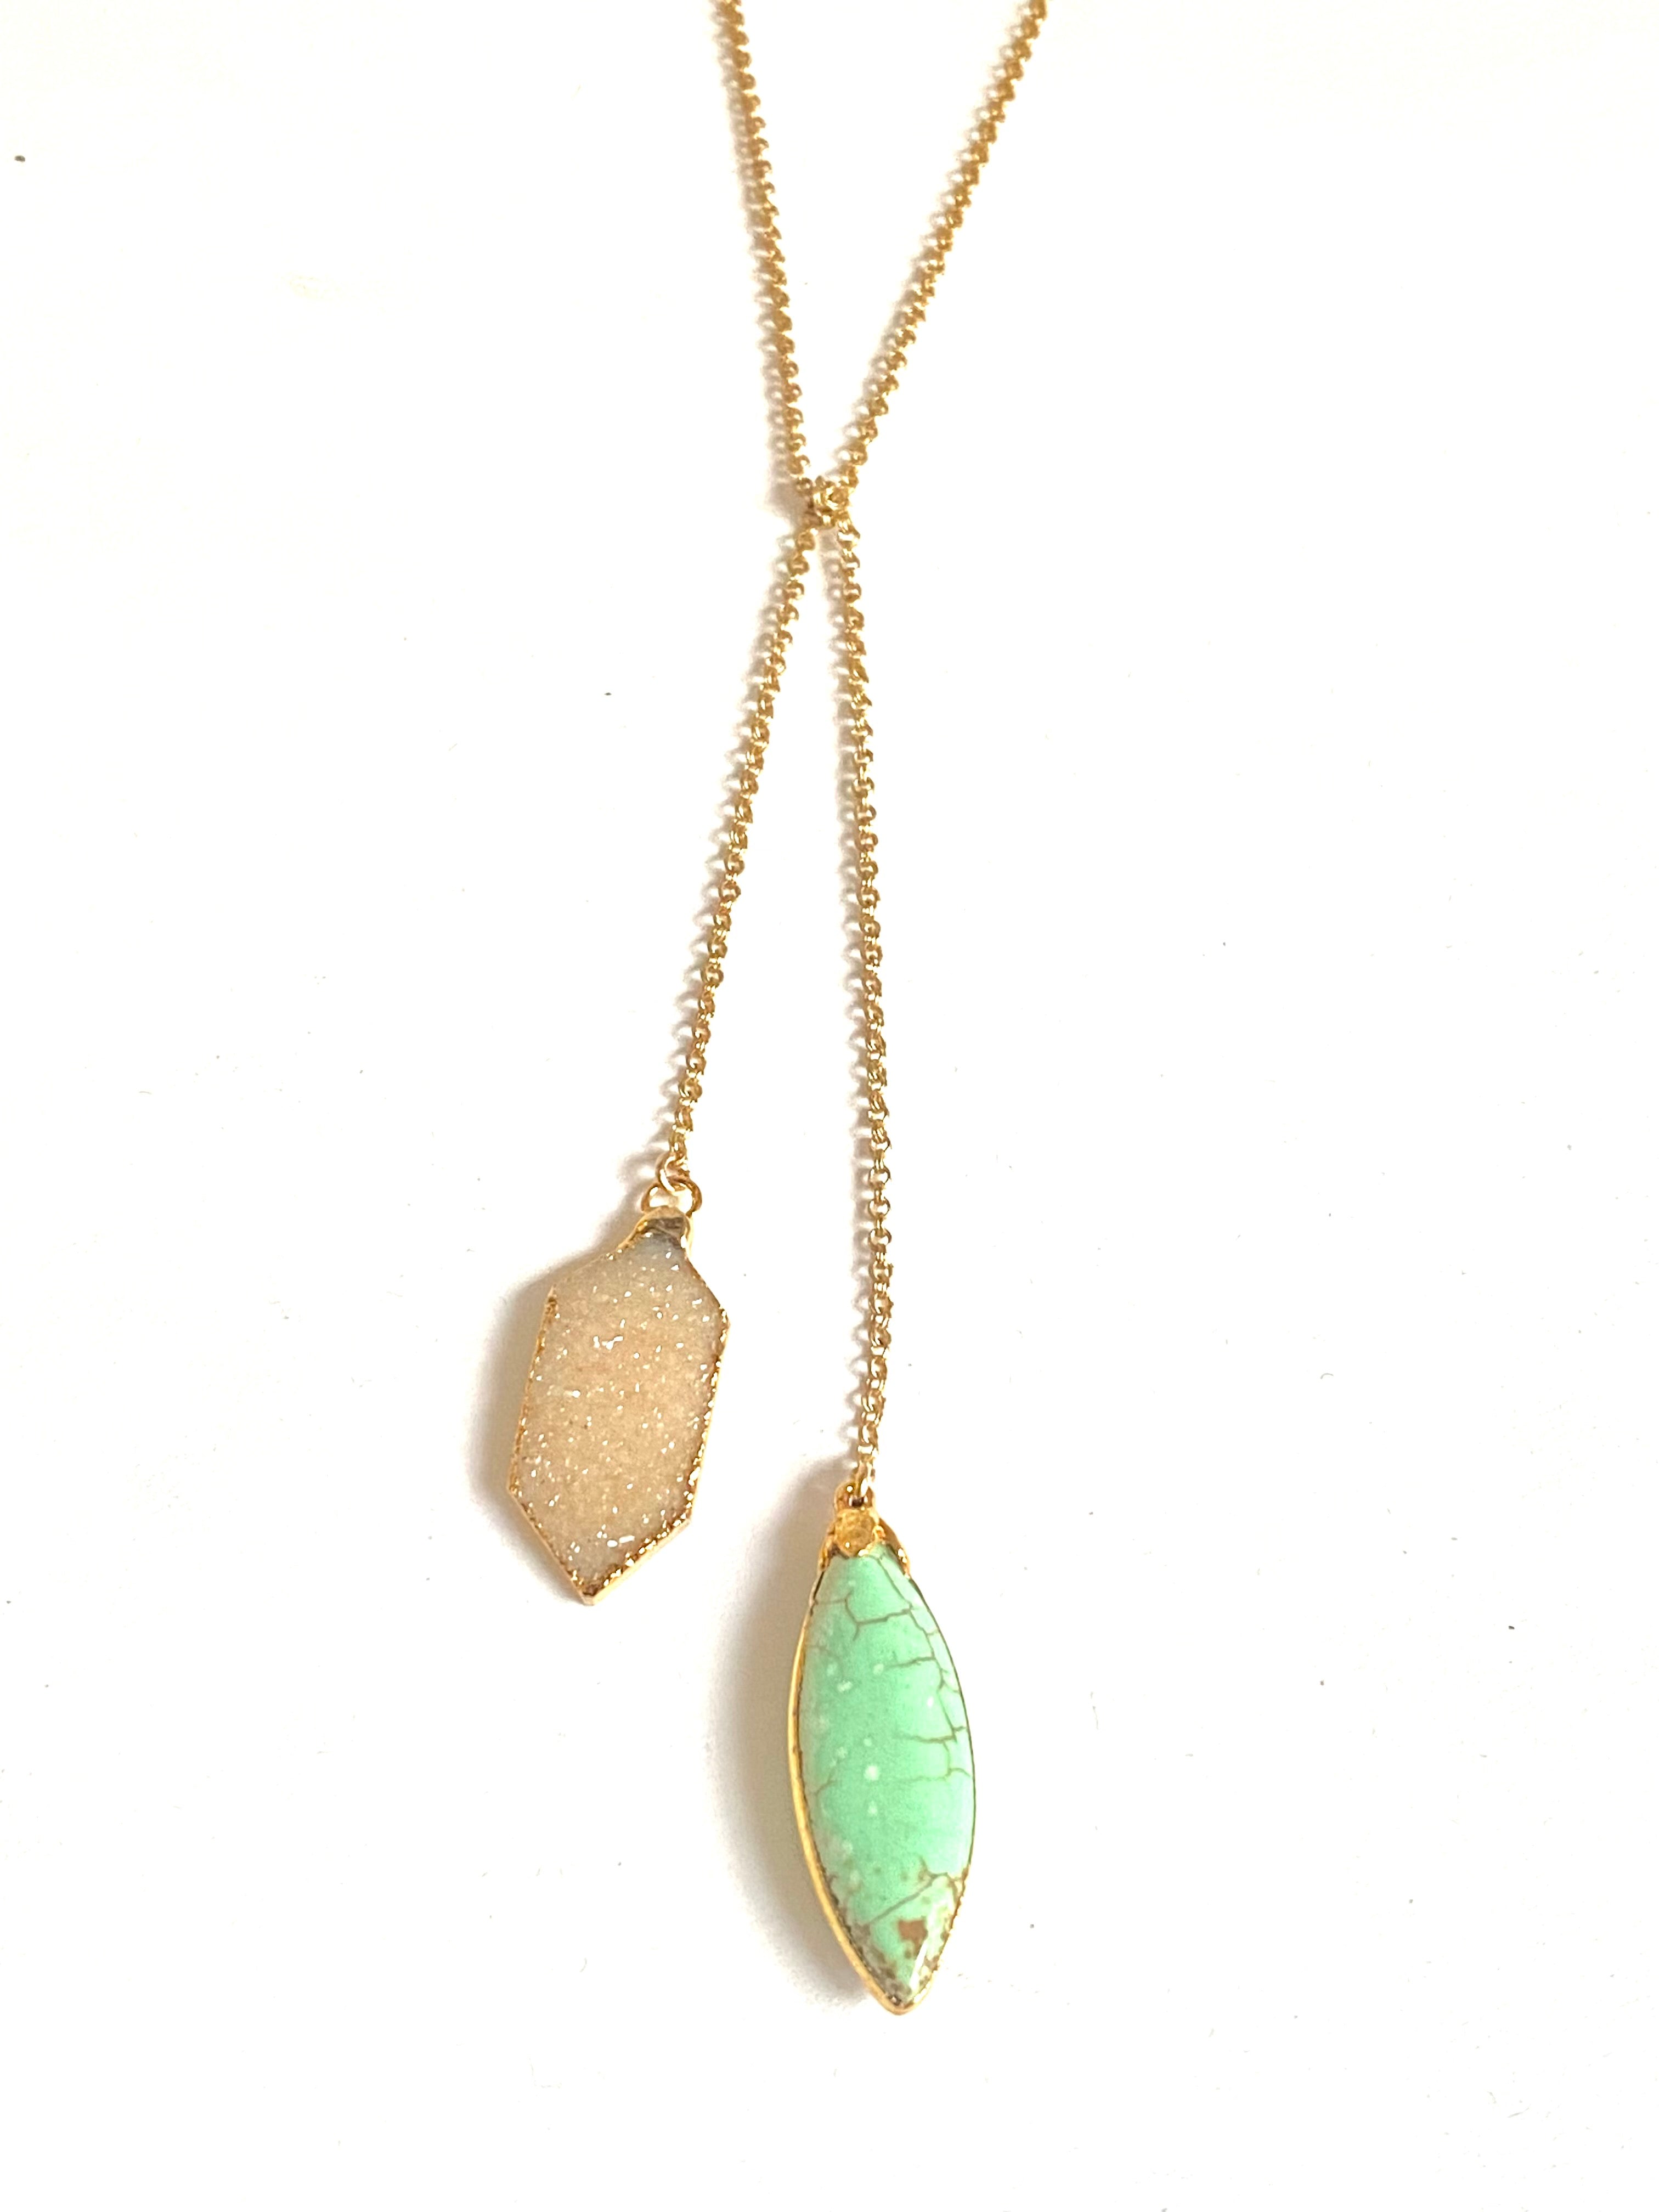 Green turquoise and druzy wrap lariat